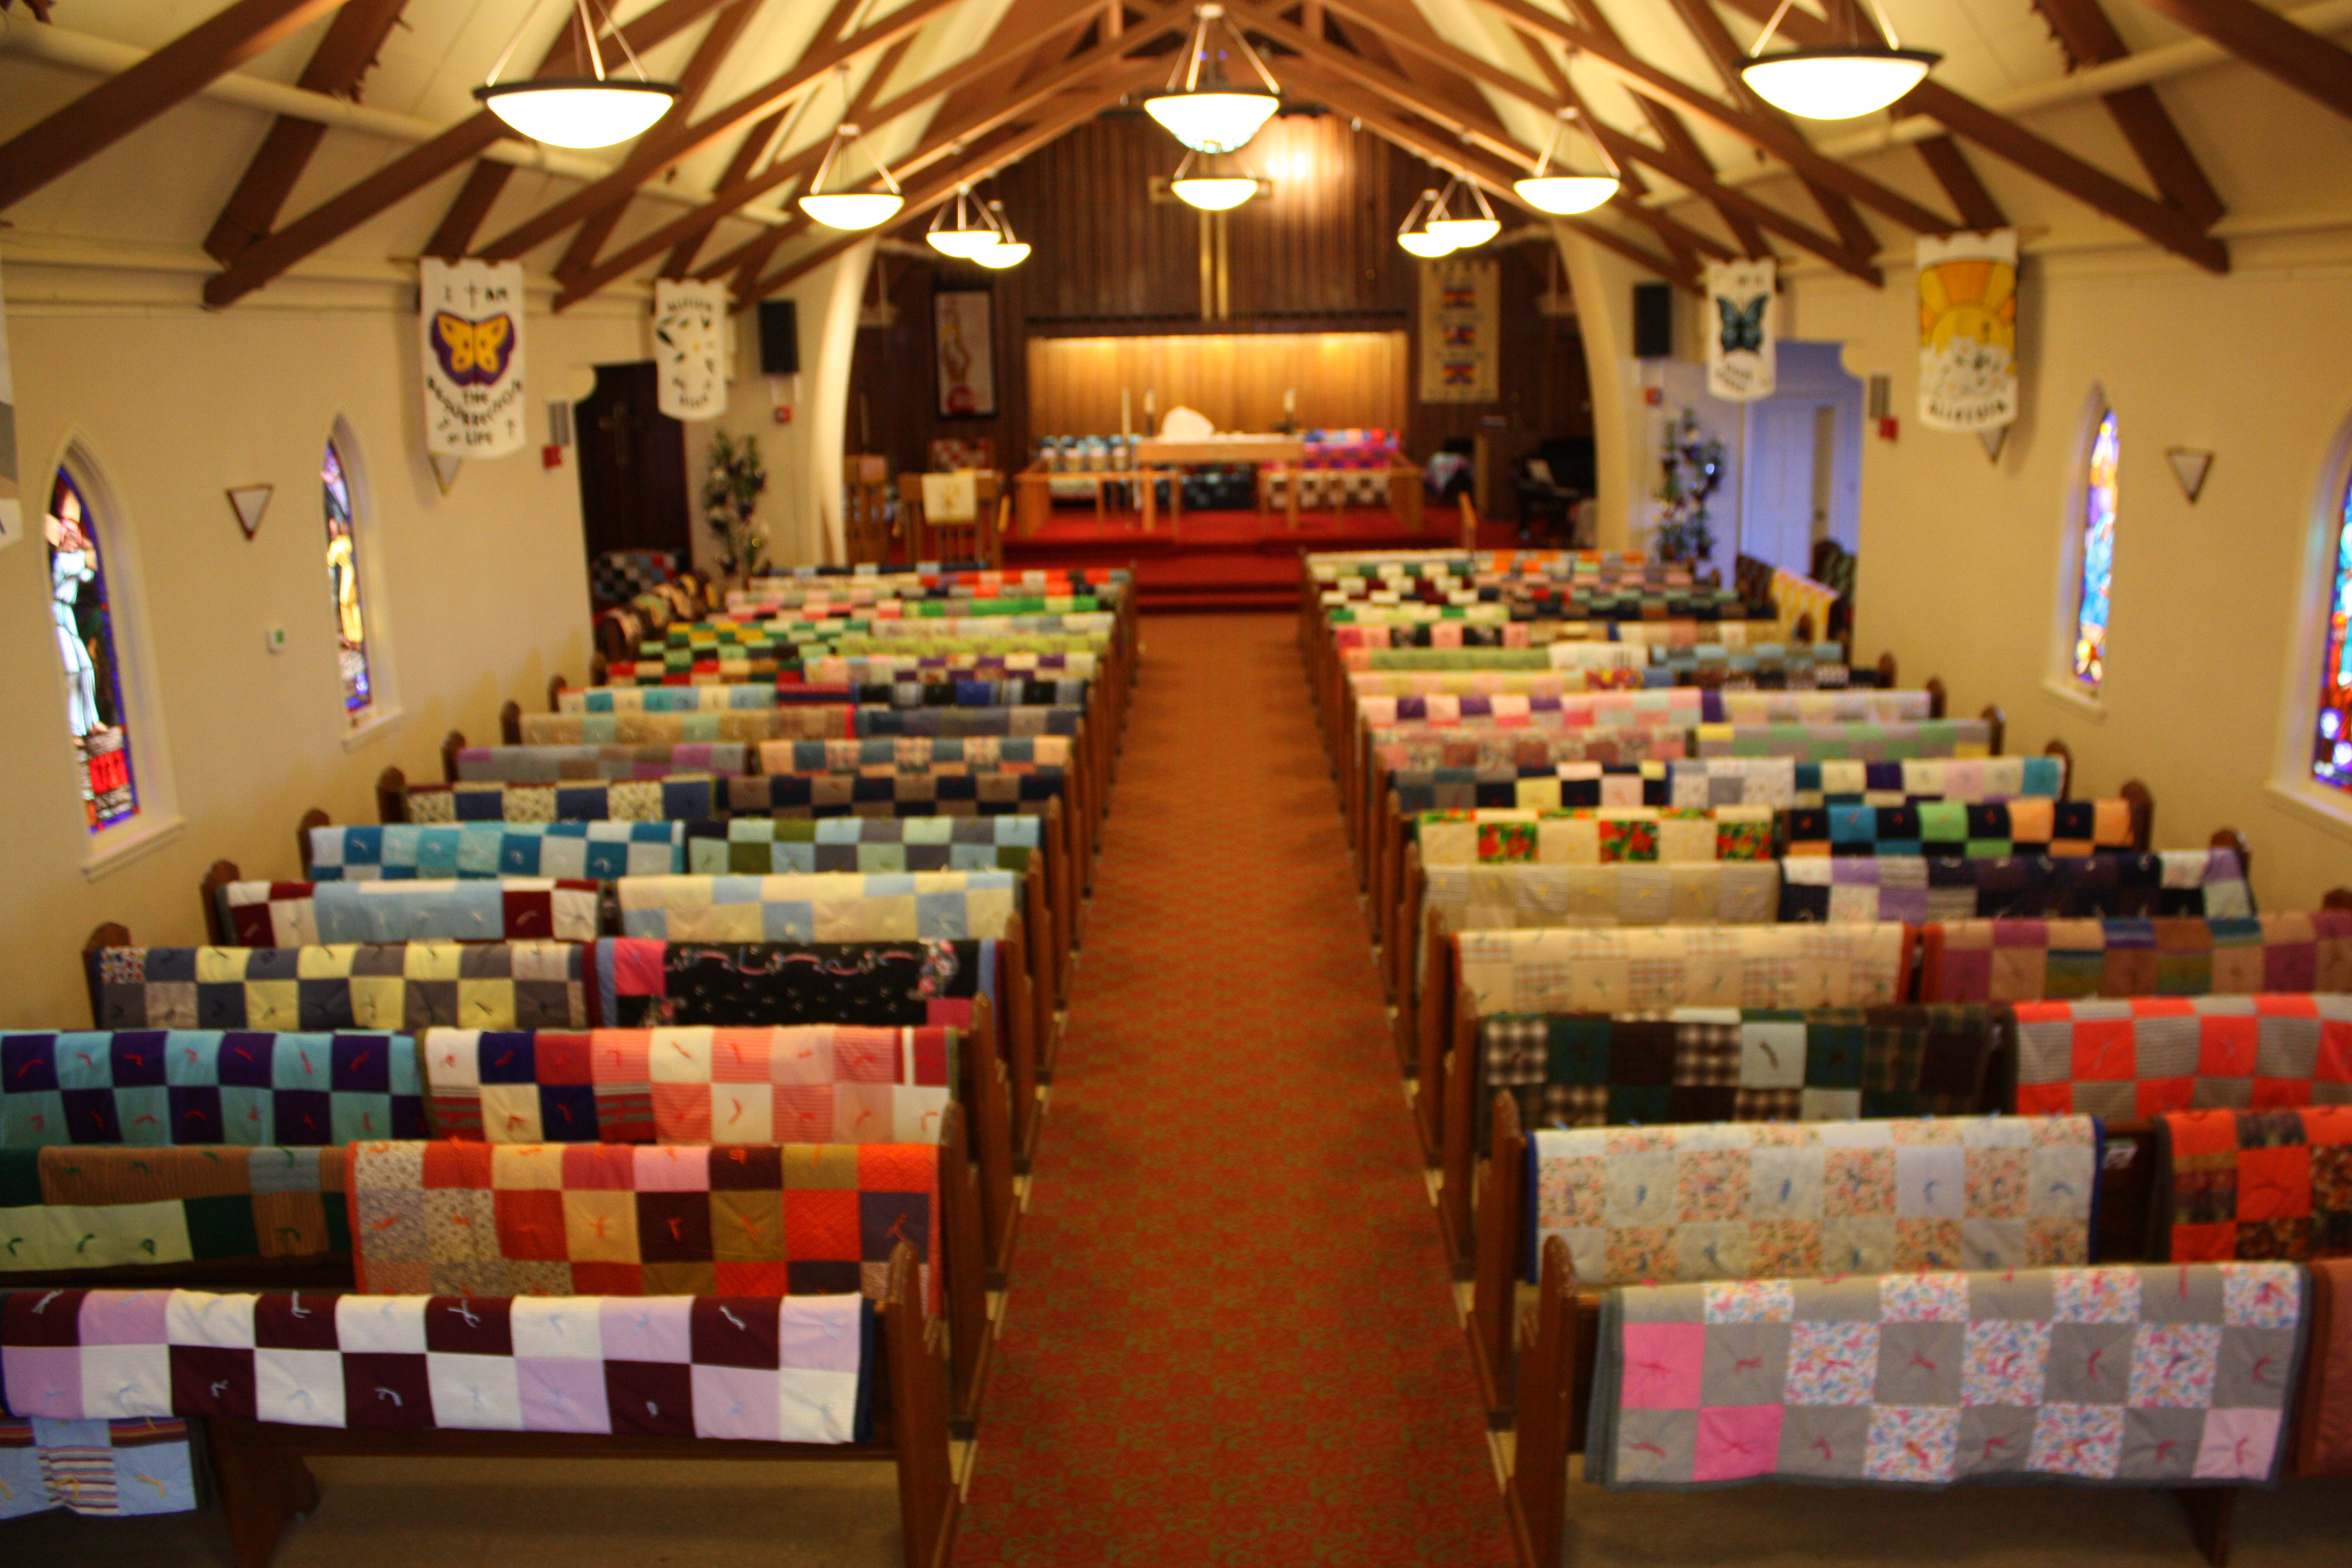 images/stories/HeaderImages/Frame2/Zion_in_quilts_above.JPG